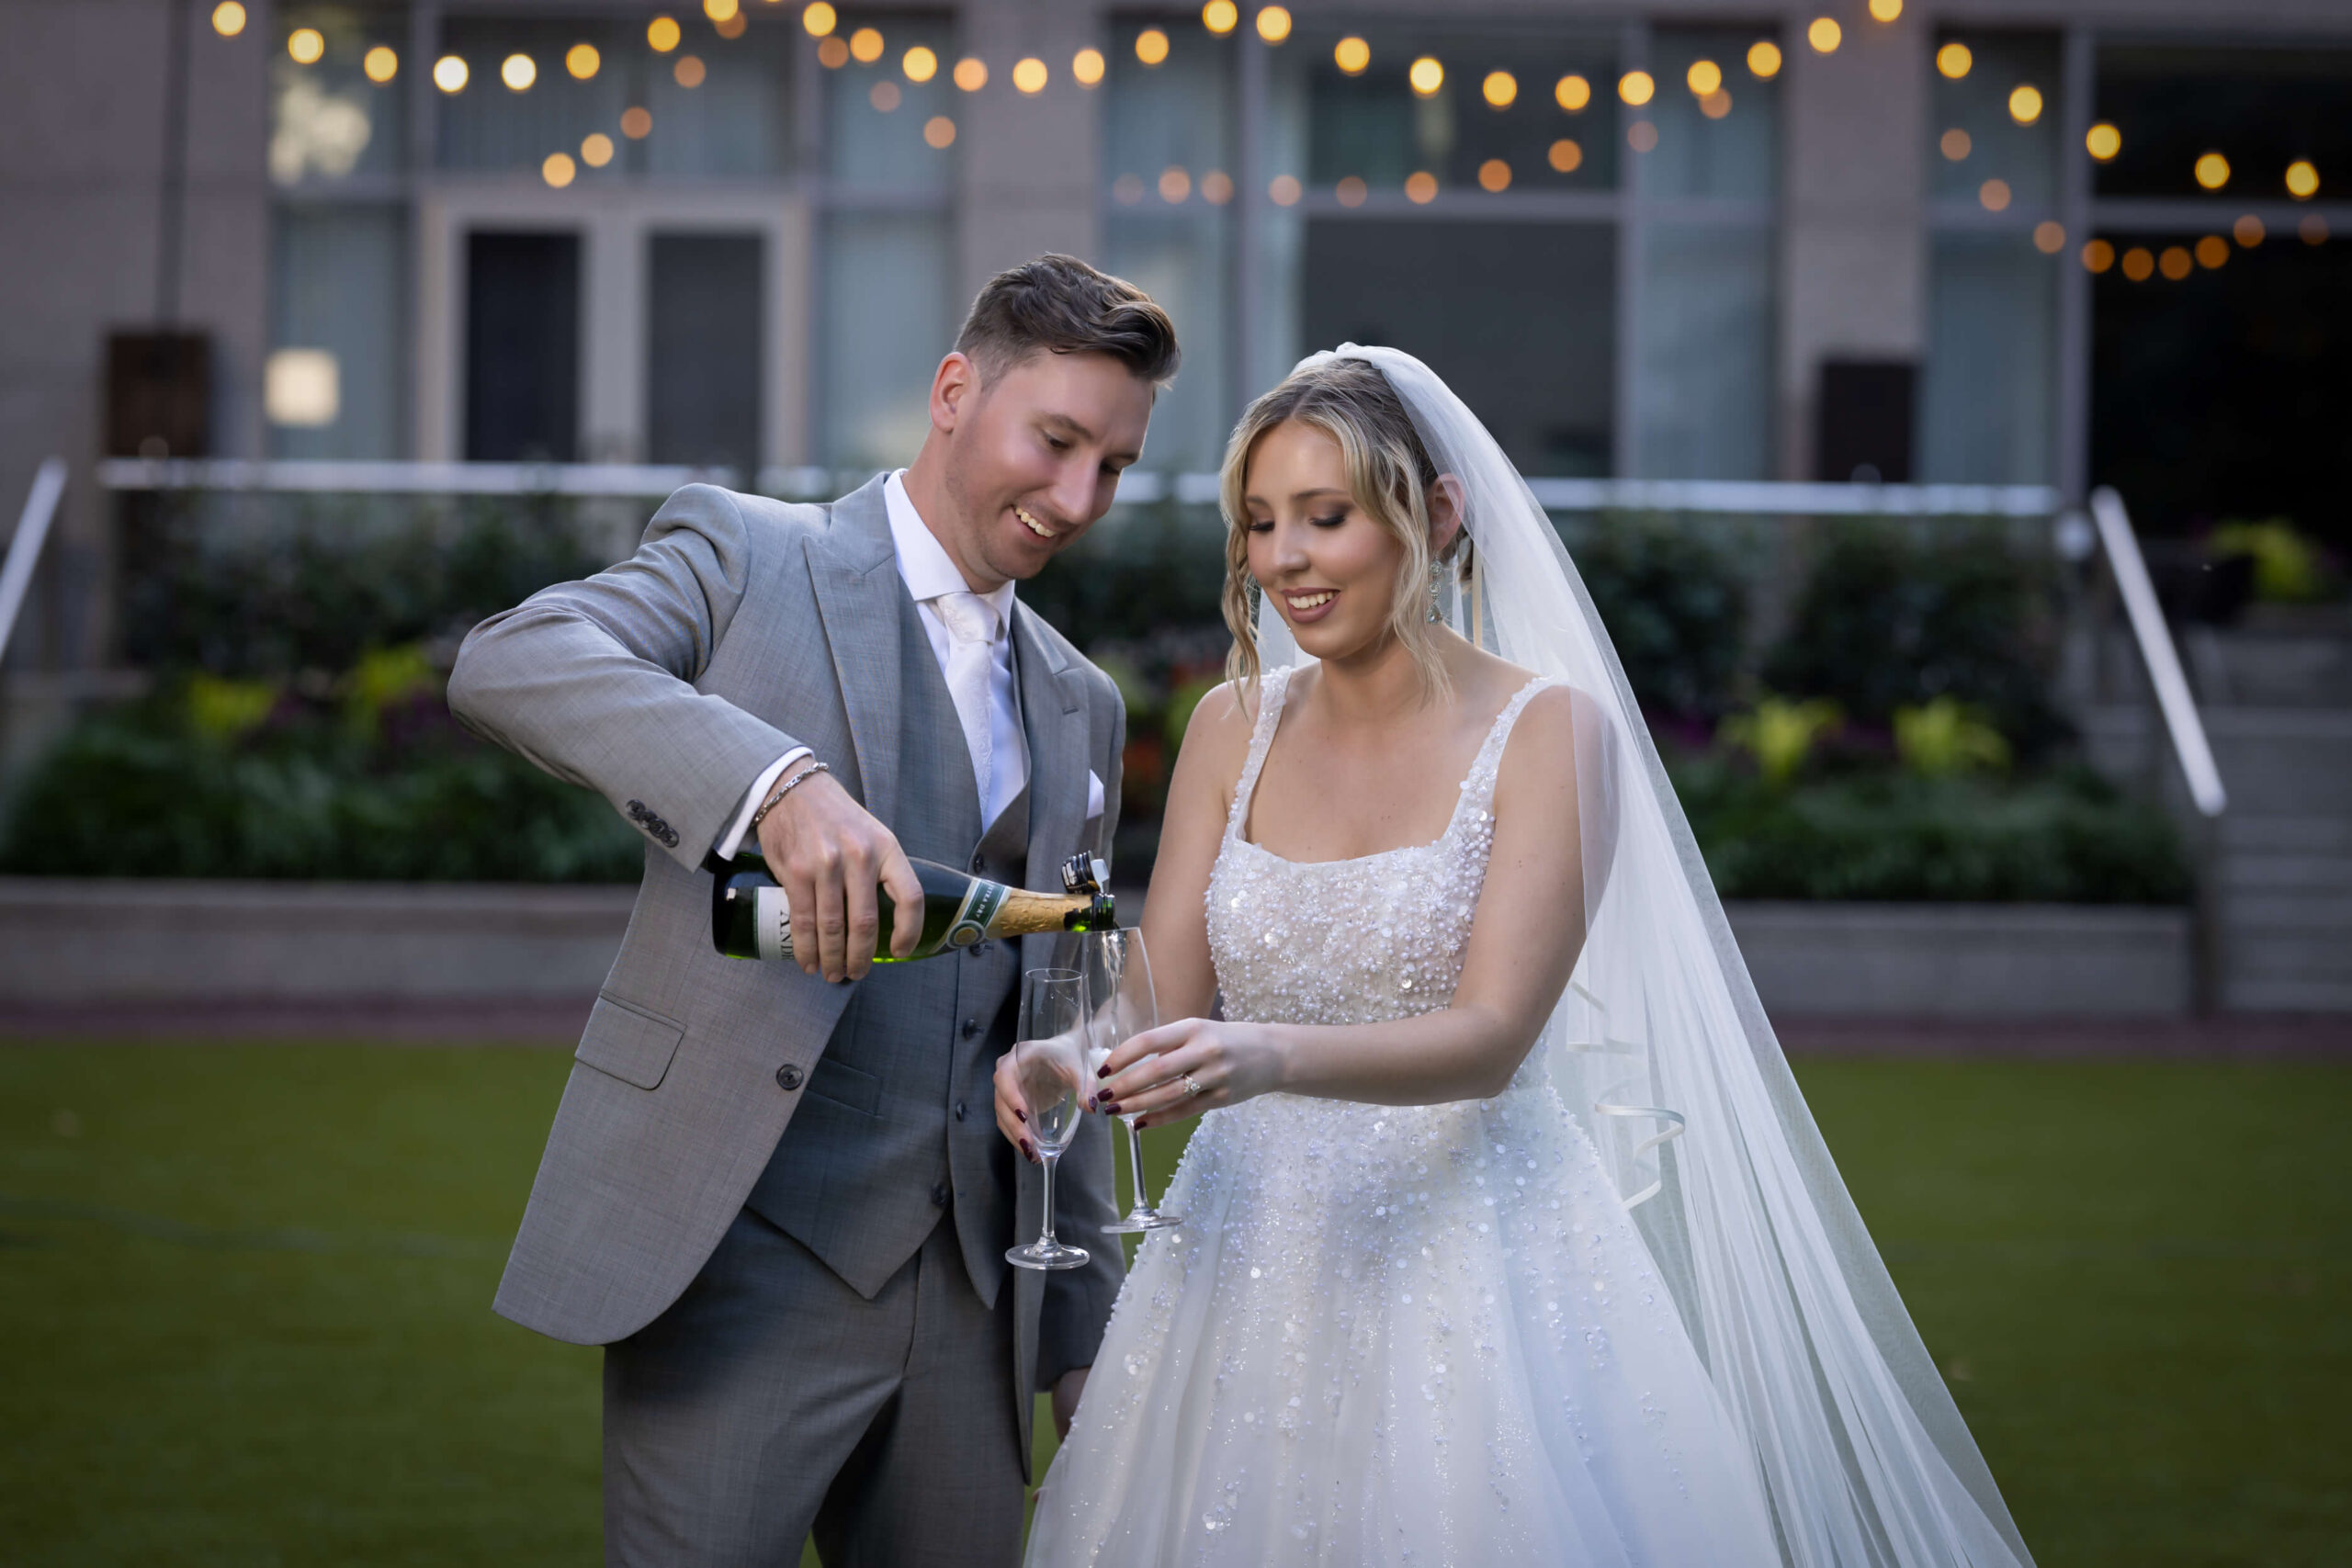 groom pouring champagne into a glass while the bride holds it